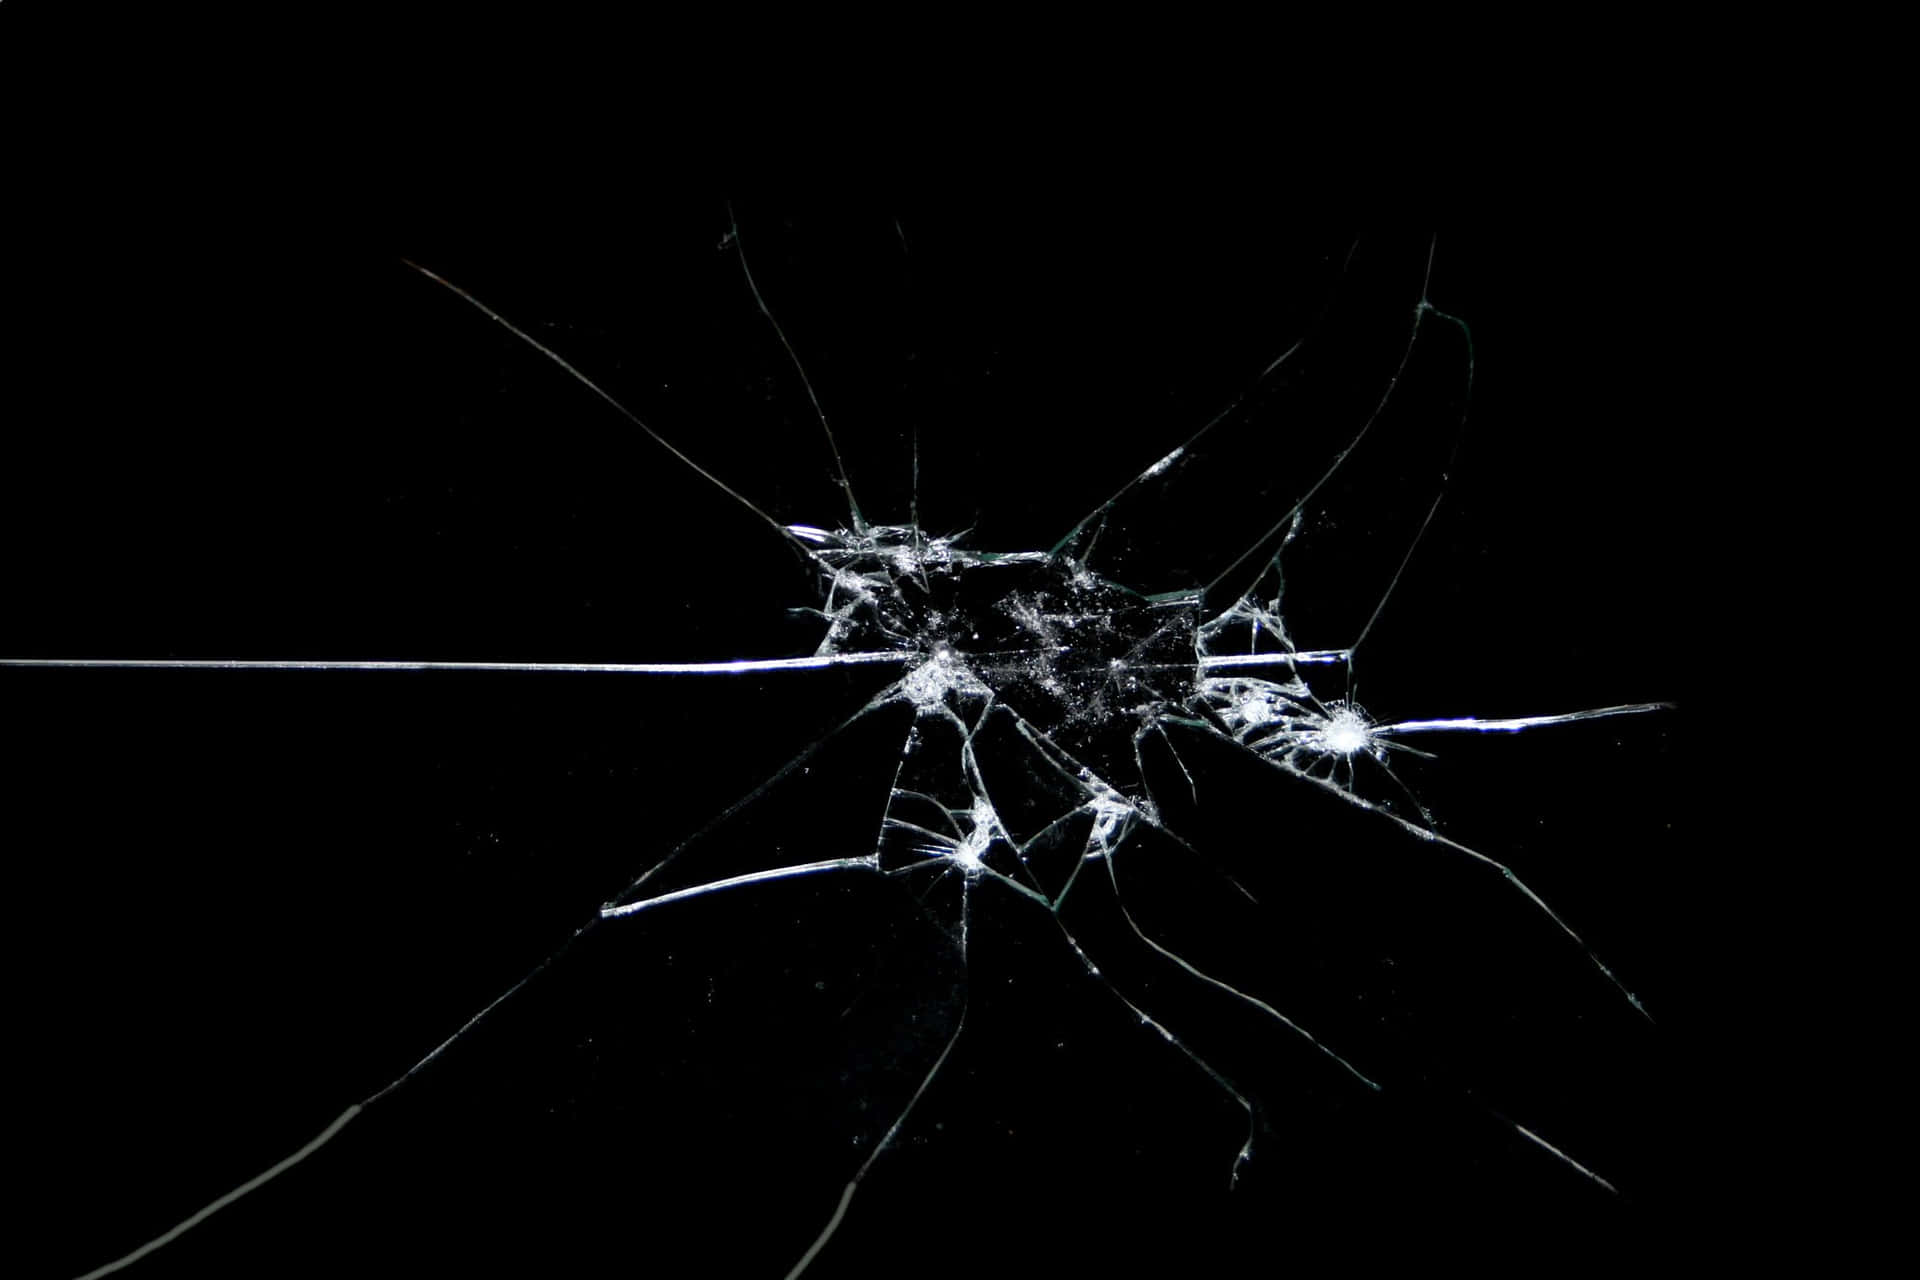 Shattered Dreams - Close up of Broken Glass